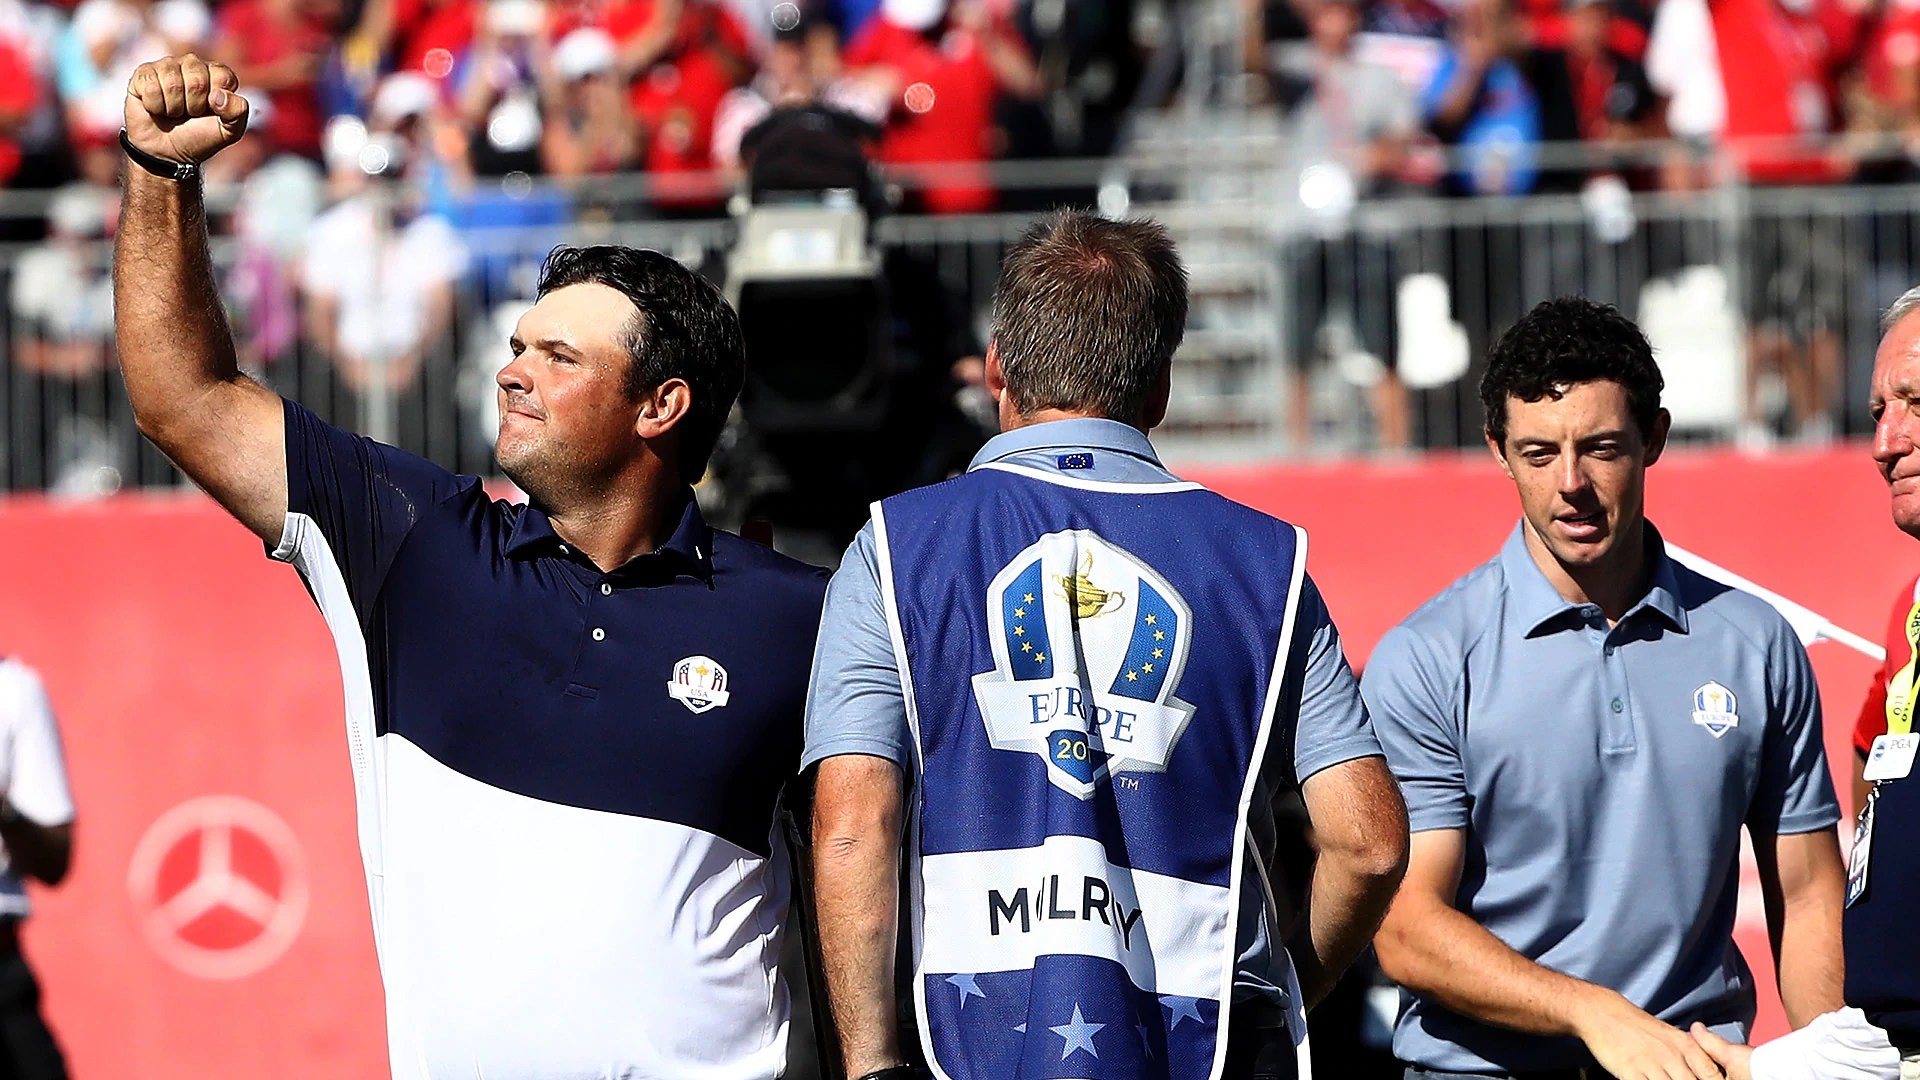 Remember when: Watch Rory-Reed Ryder Cup highlights